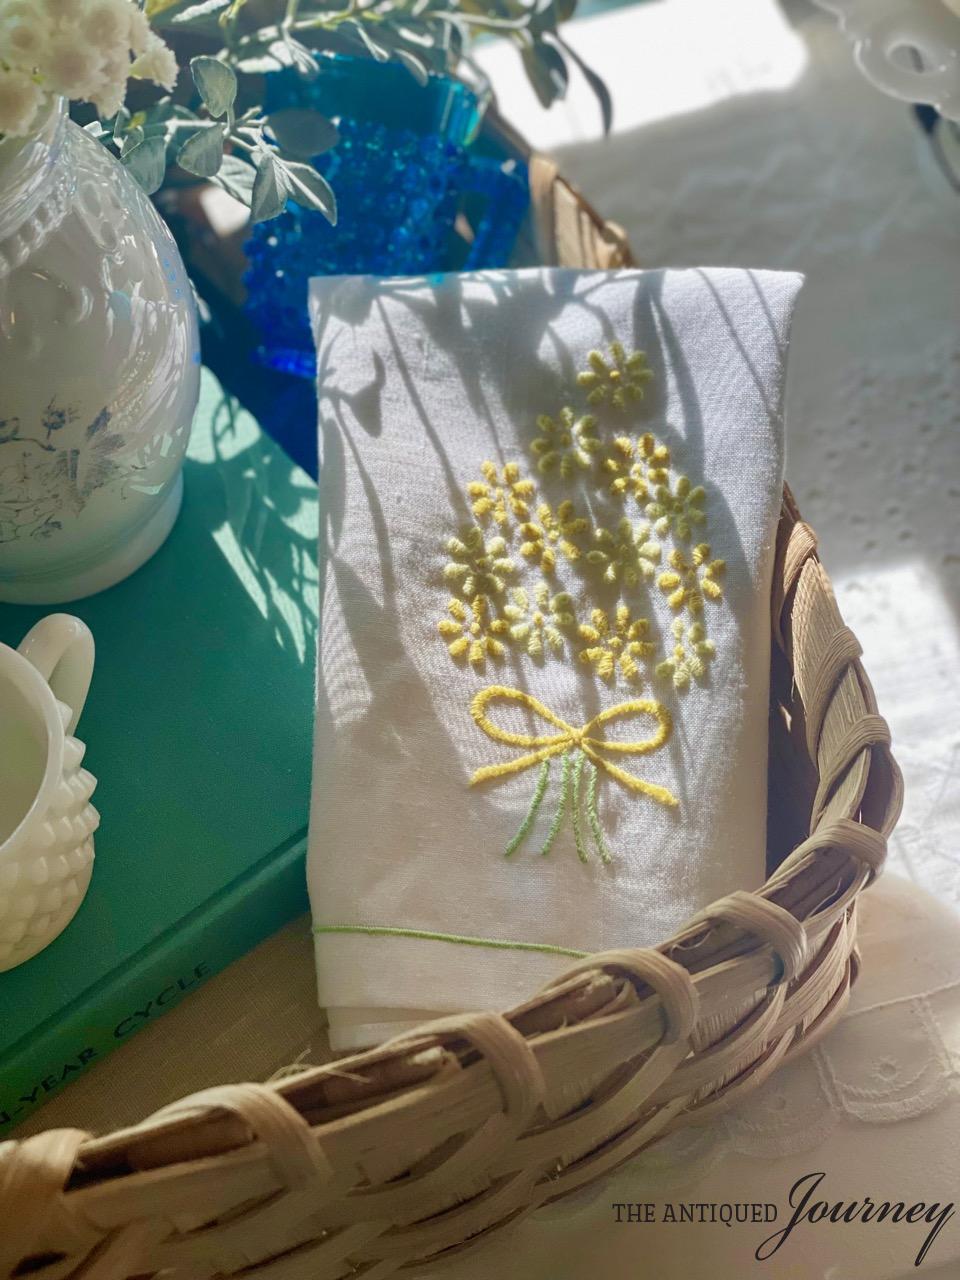 a vintage linen napkin with yellow flowers in a summer vignette